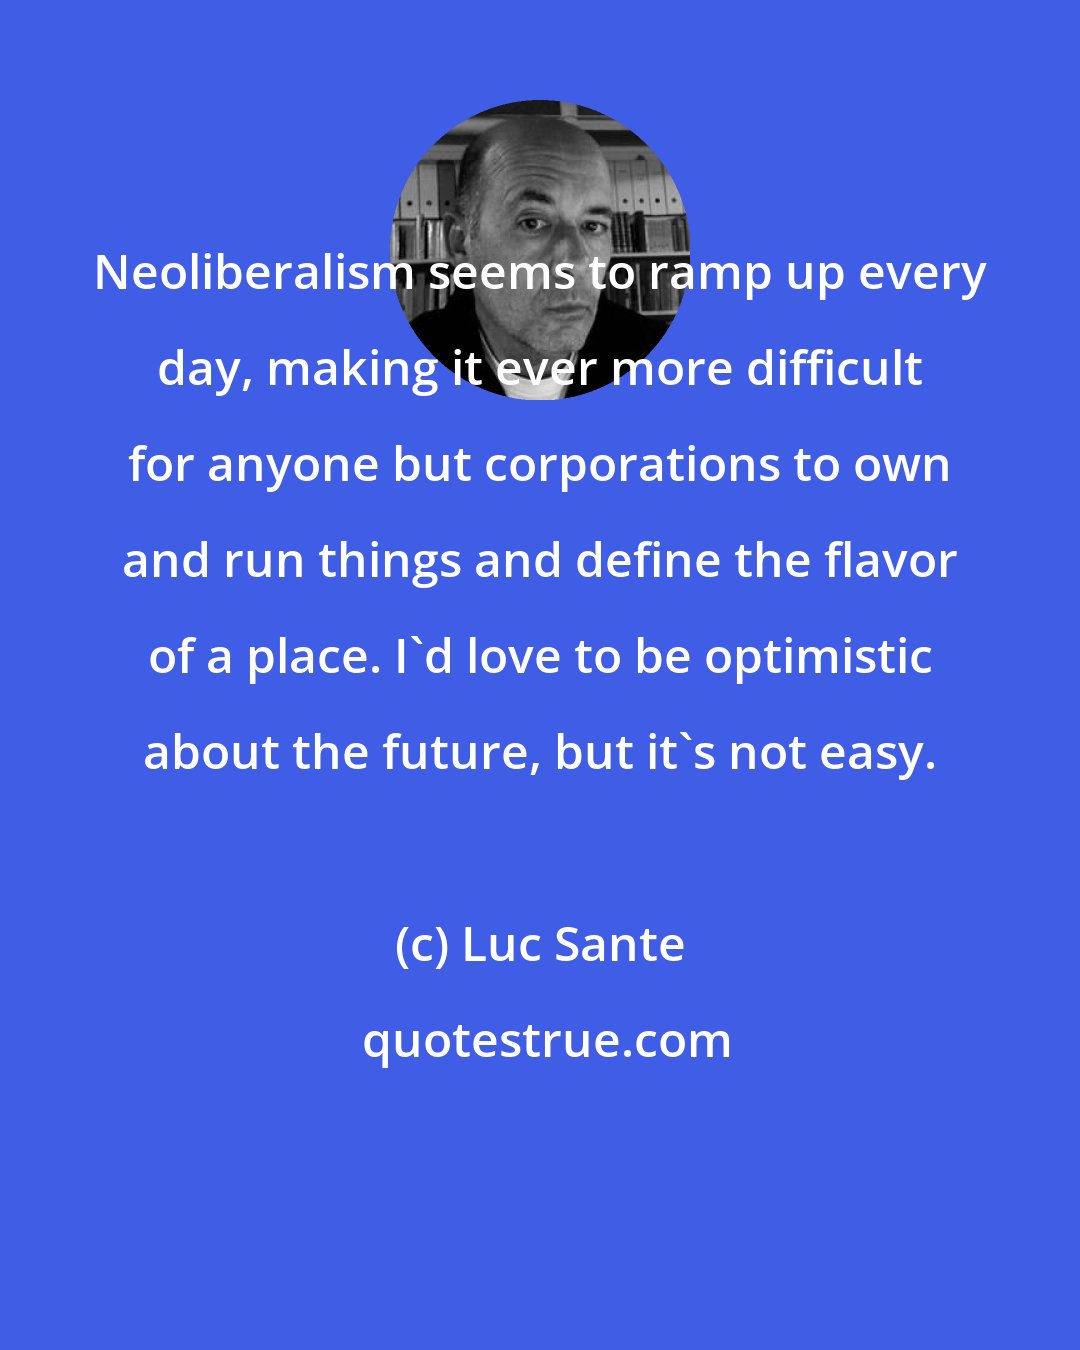 Luc Sante: Neoliberalism seems to ramp up every day, making it ever more difficult for anyone but corporations to own and run things and define the flavor of a place. I'd love to be optimistic about the future, but it's not easy.